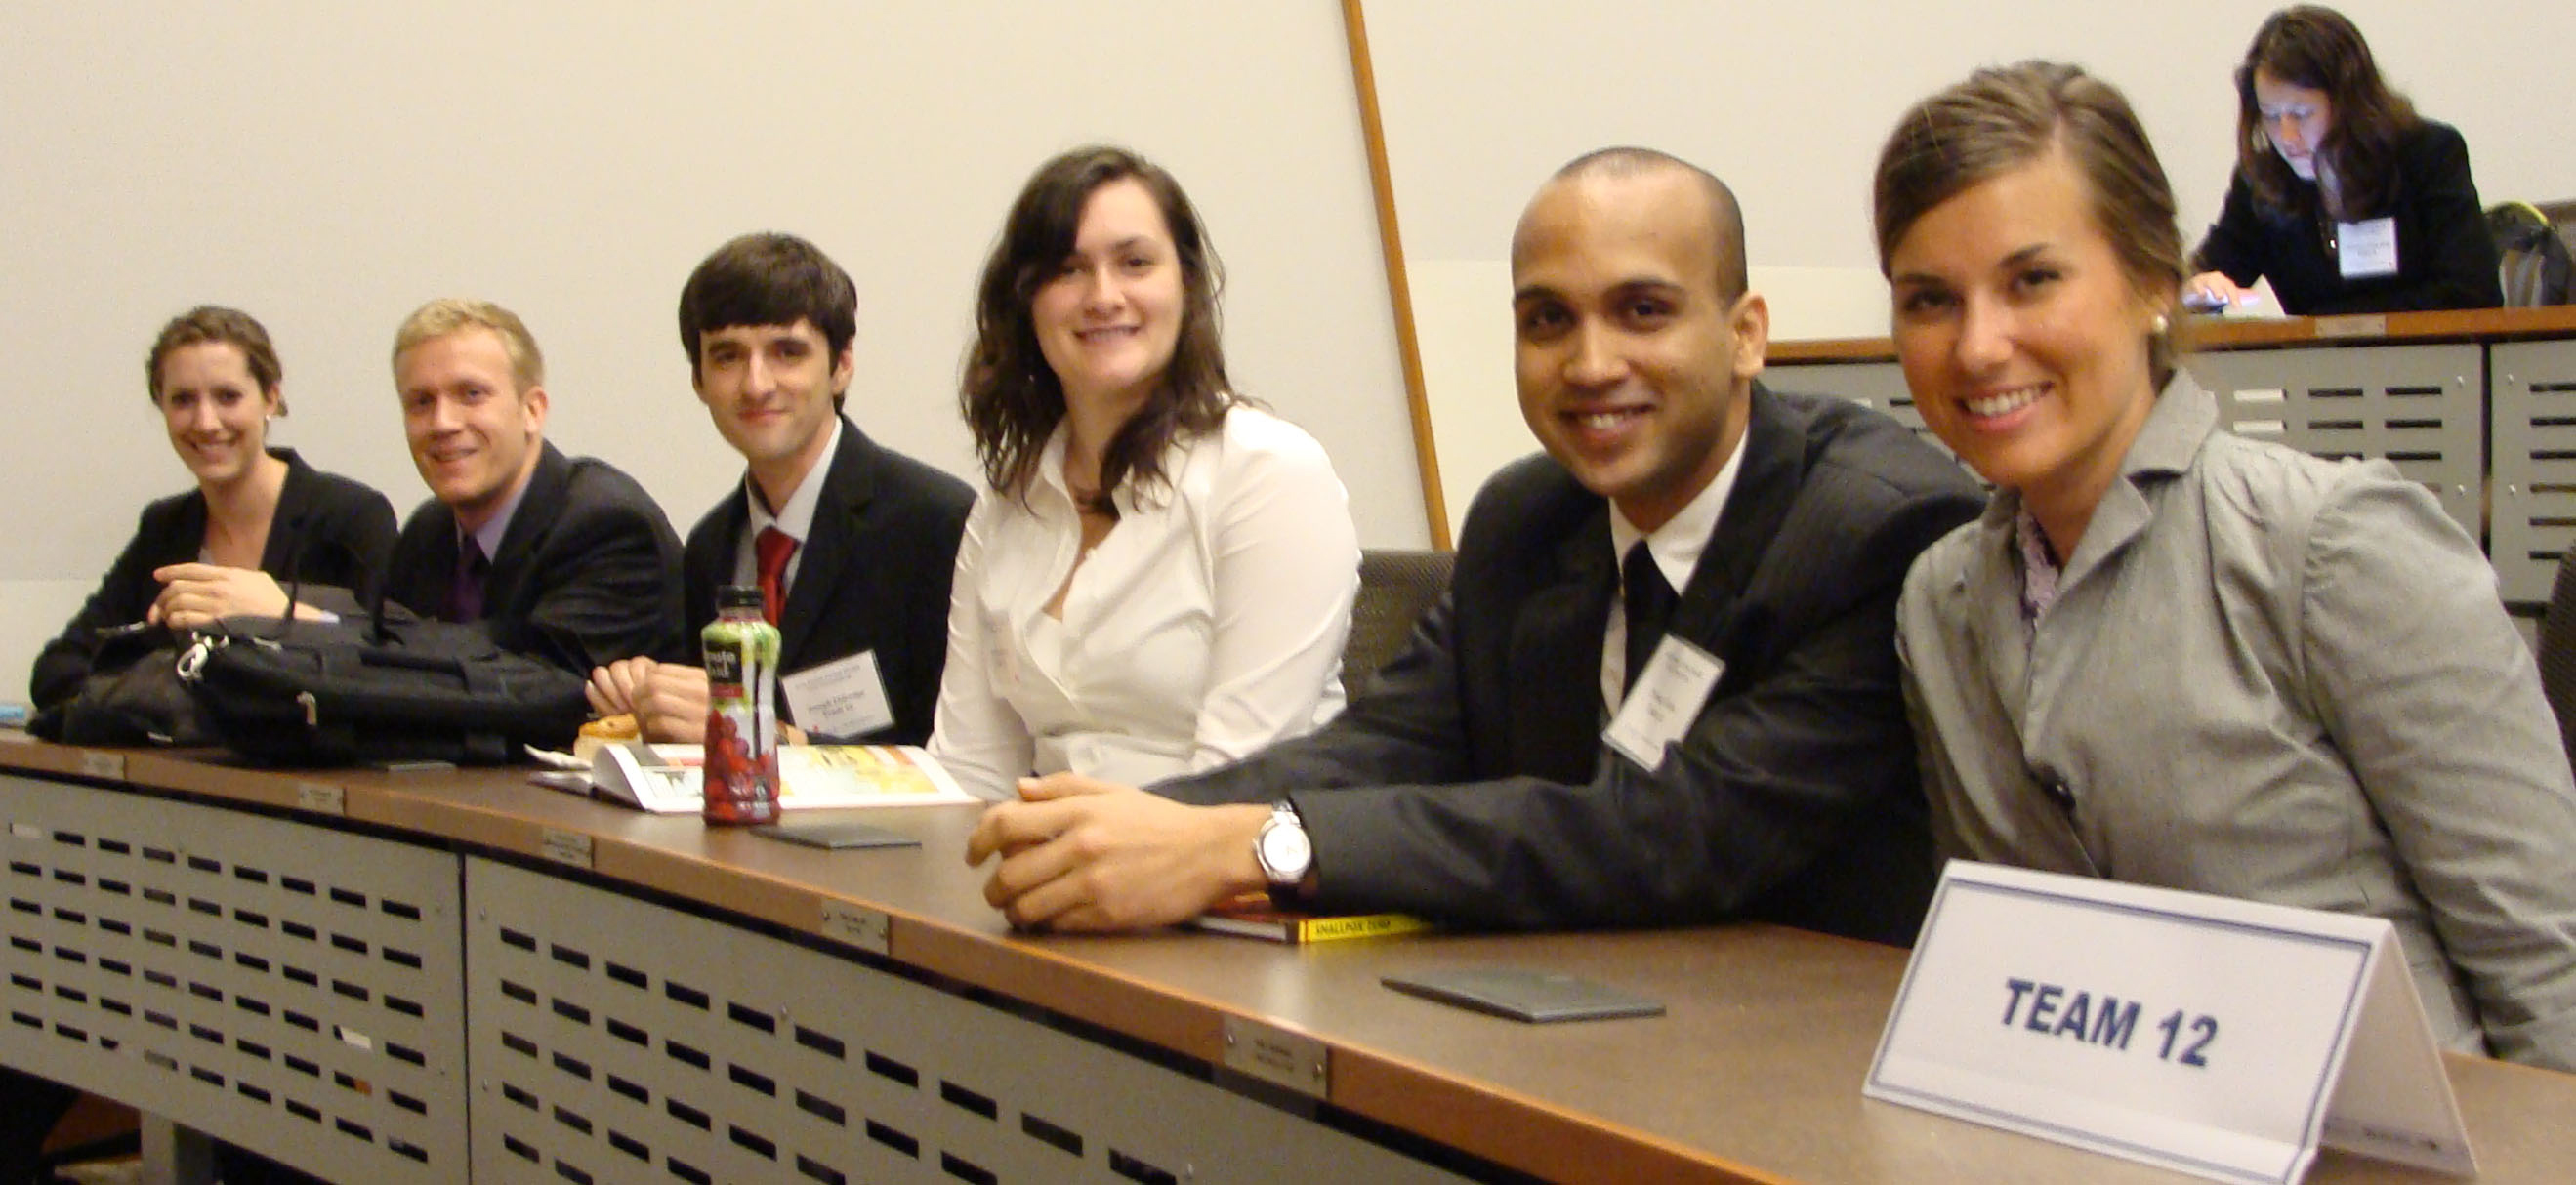 Group photo left to right: Caitlin Carr, Christopher Rannefors, Joseph Eldredge, Amanda Below, Pranay Sinha and Terra G. Bailey